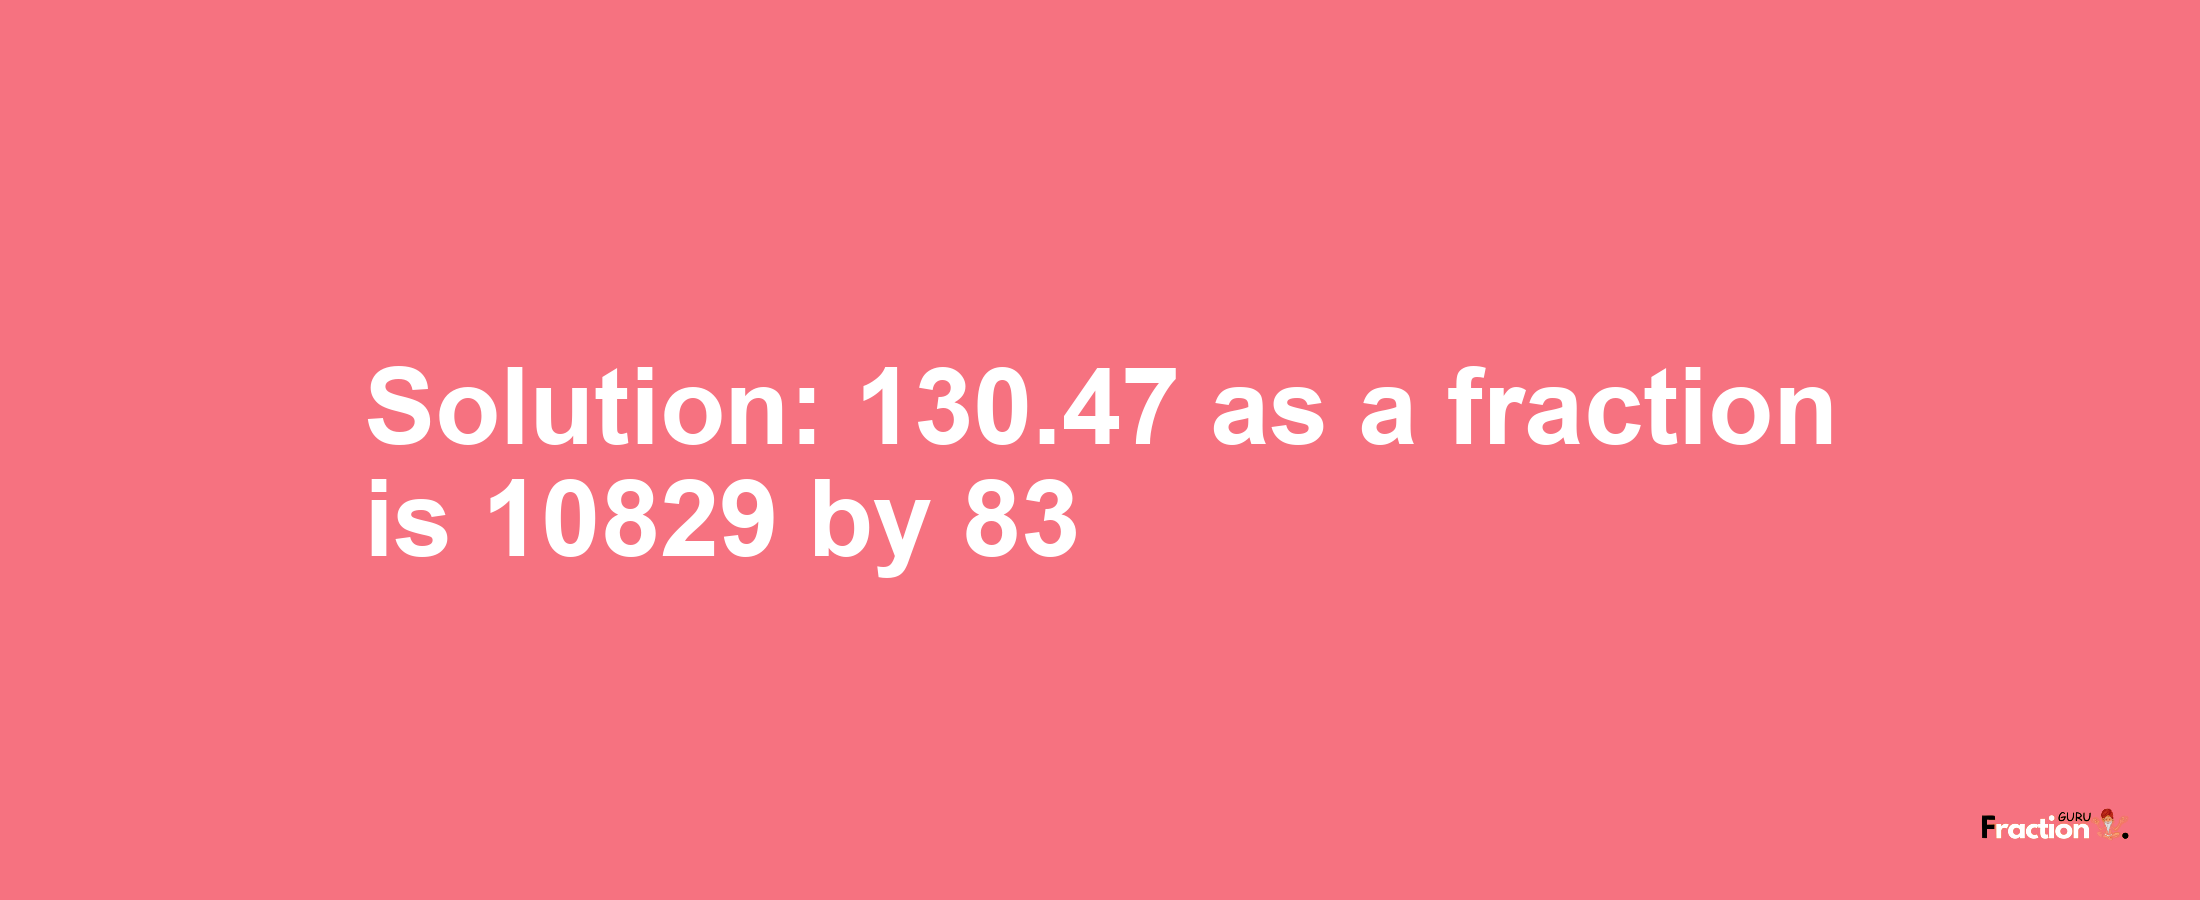 Solution:130.47 as a fraction is 10829/83